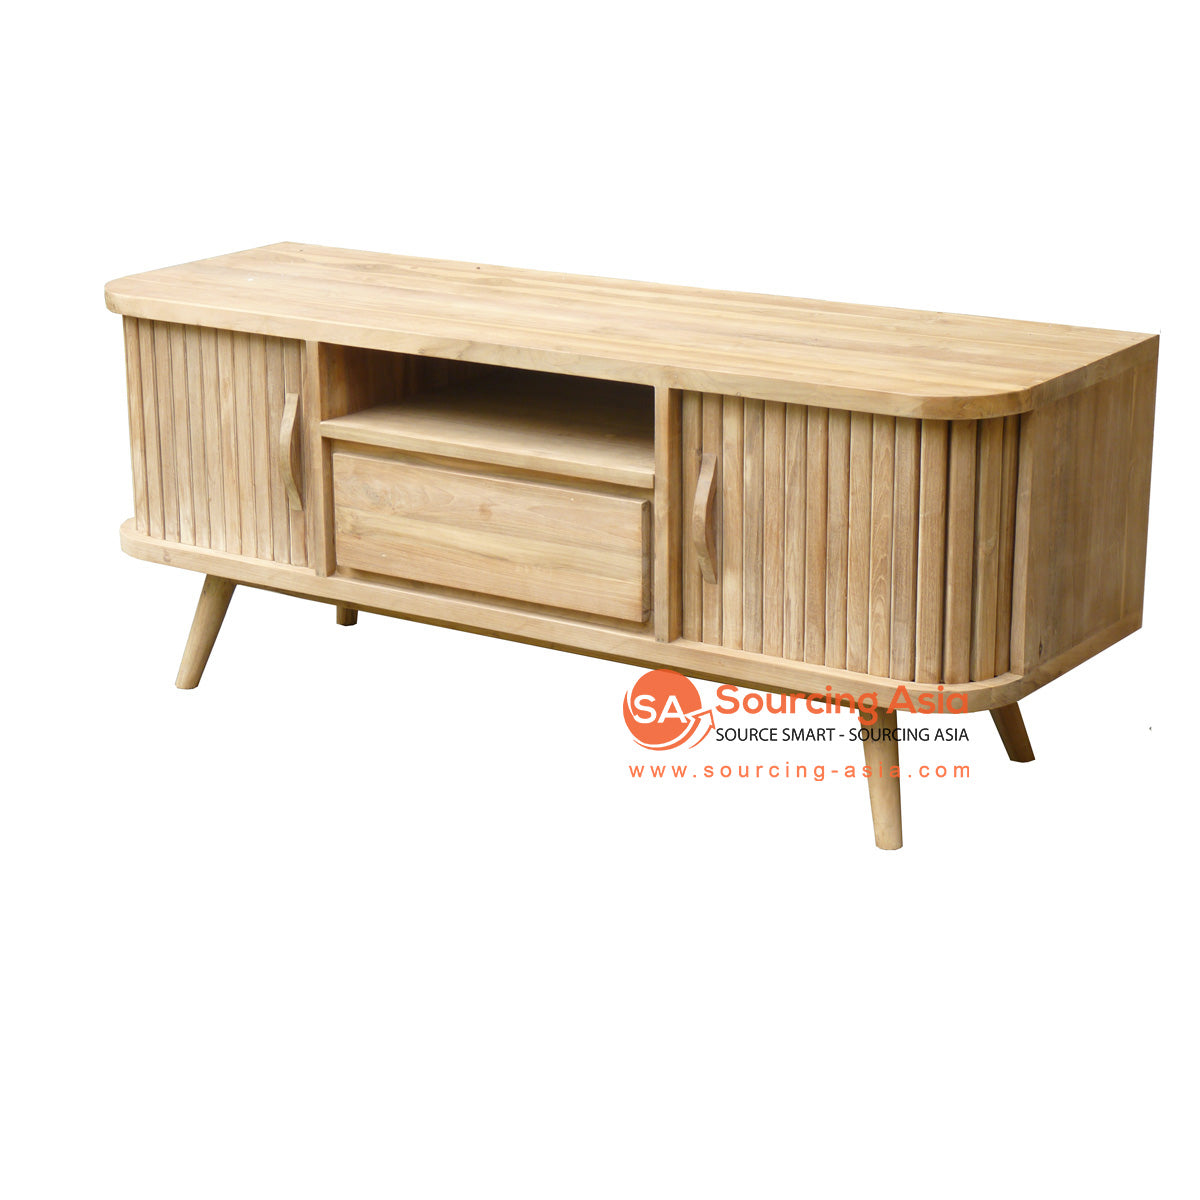 ECL312 NATURAL RECYCLED TEAK WOOD HAVANA ENTERTAINMENT UNIT WITH TWO SLIDING DOORS